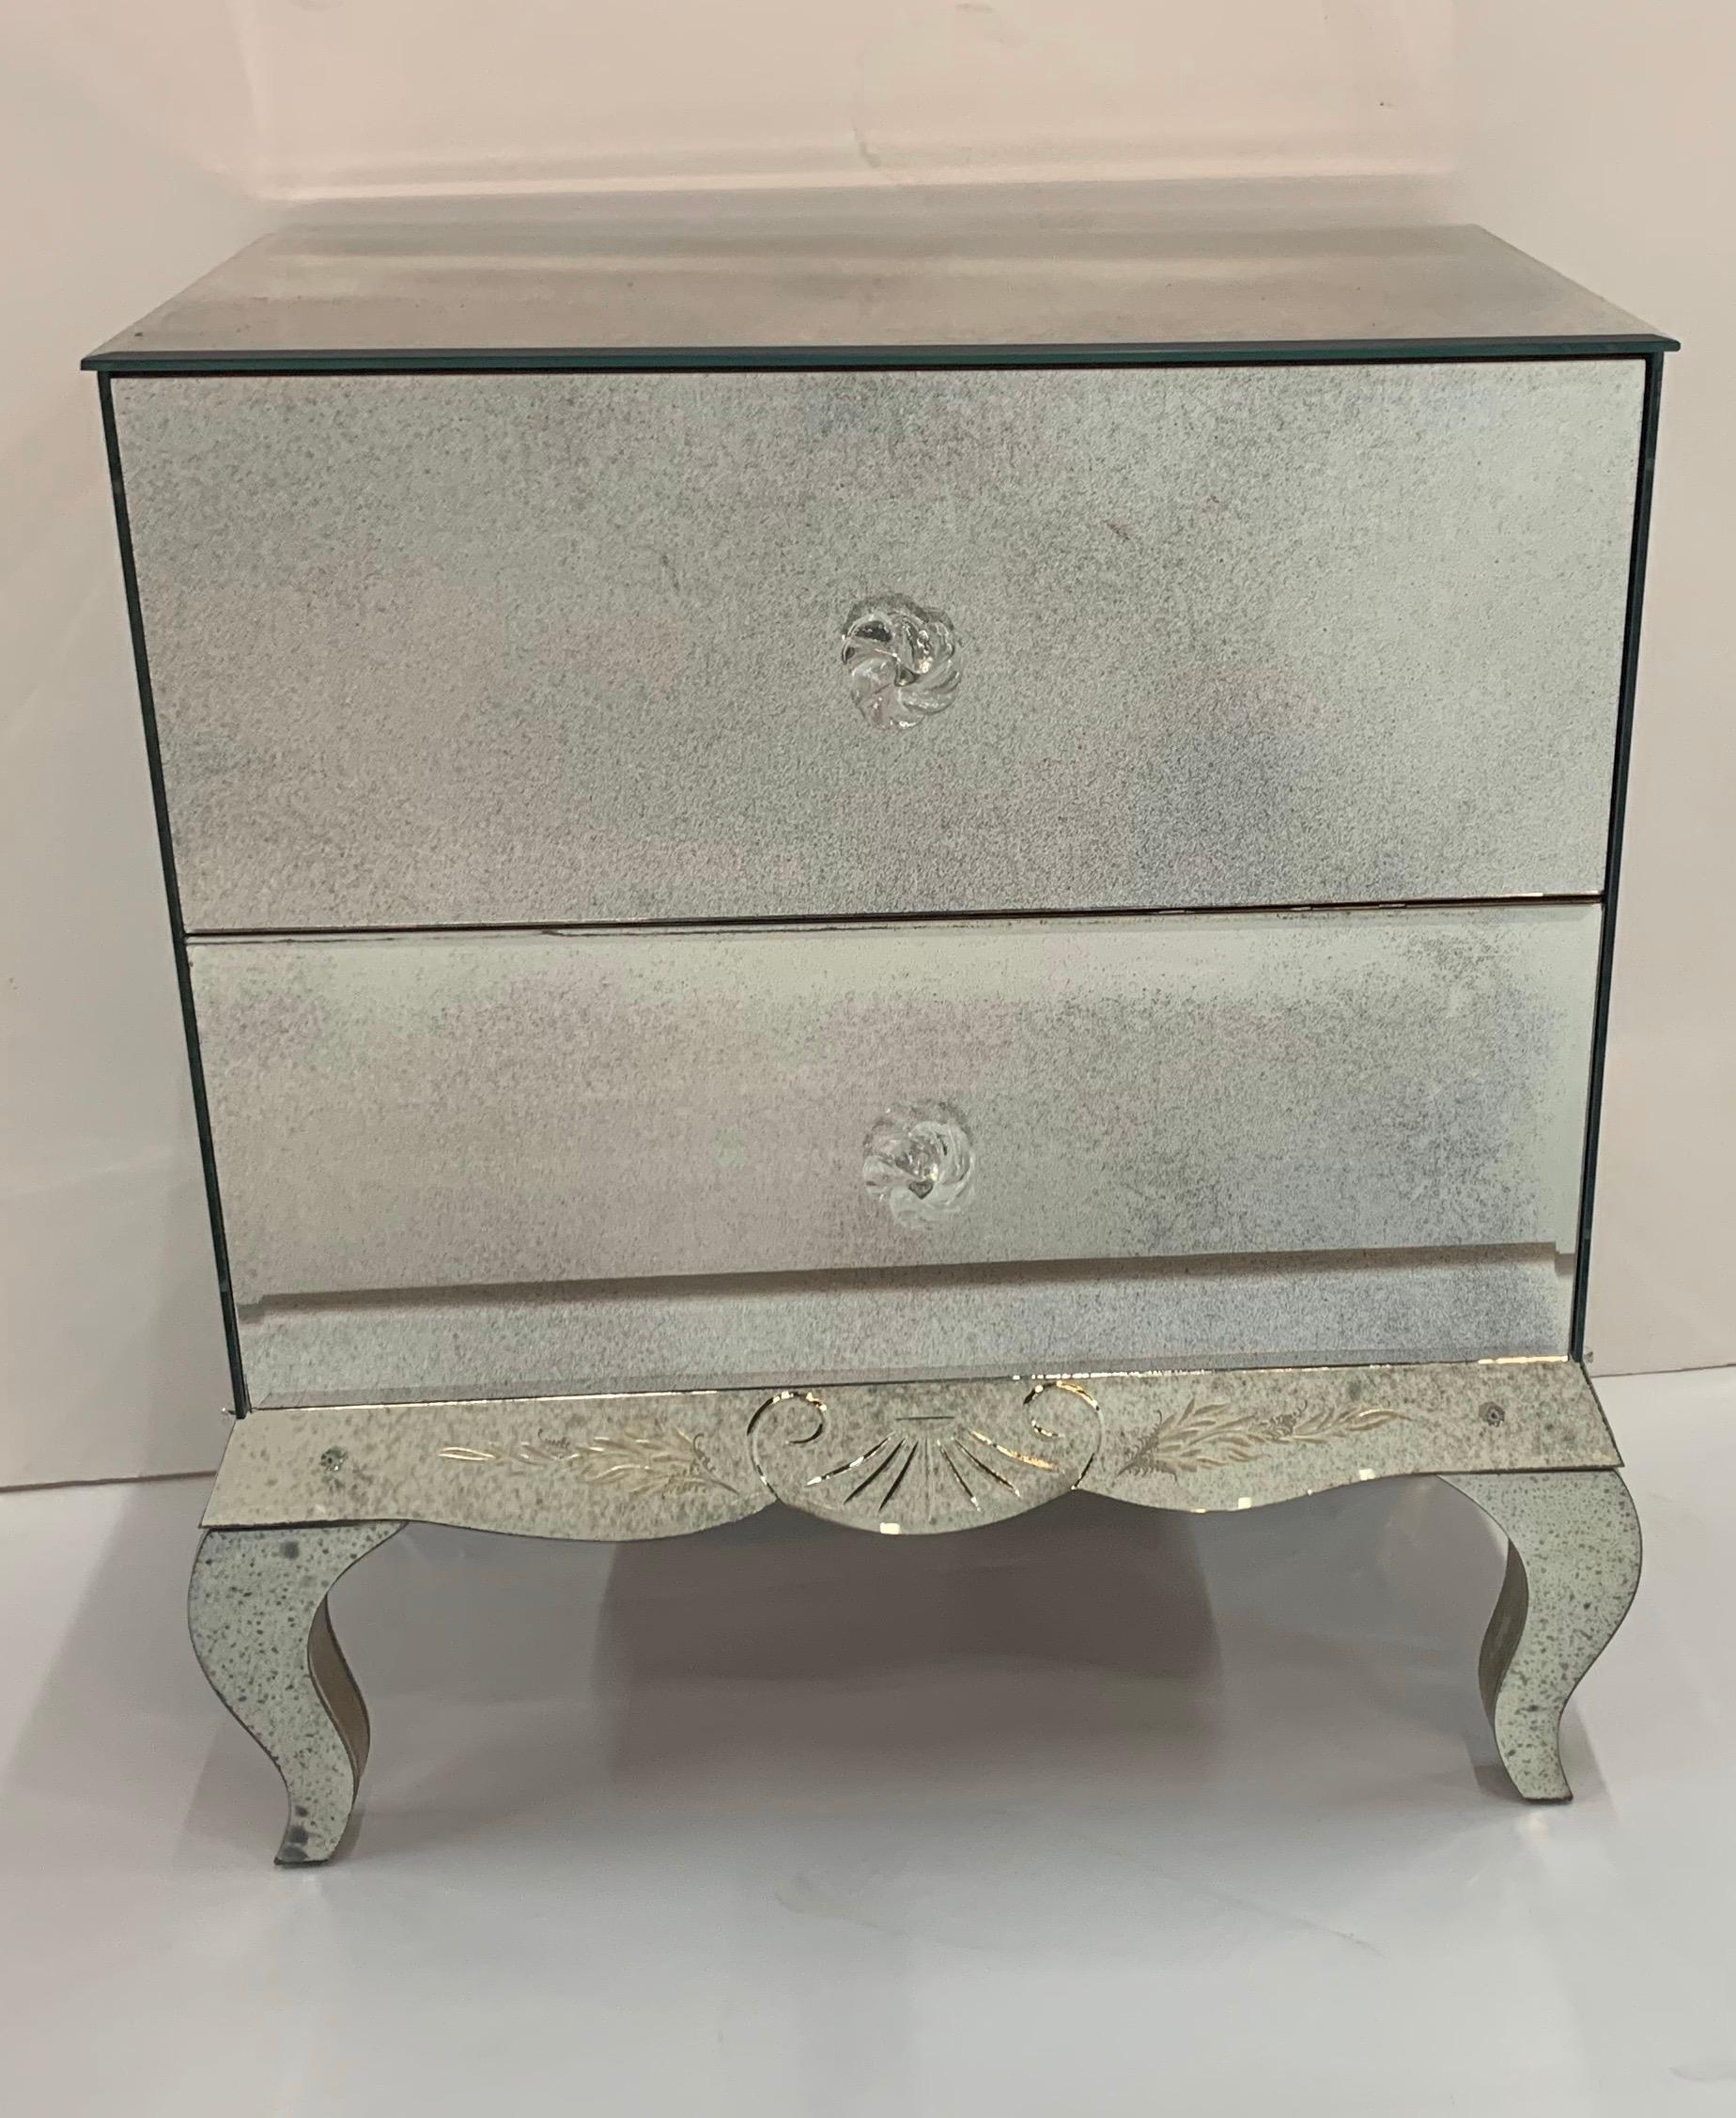 A wonderful Lorin Marsh etched two-drawer mirrored chest with flower rosette pulls and silver-leaf details

Top measurements: 
24” W x 15 1/4” D
Total height 28” H
26 1/2” wide by the legs
16” deep to the pulls.
 